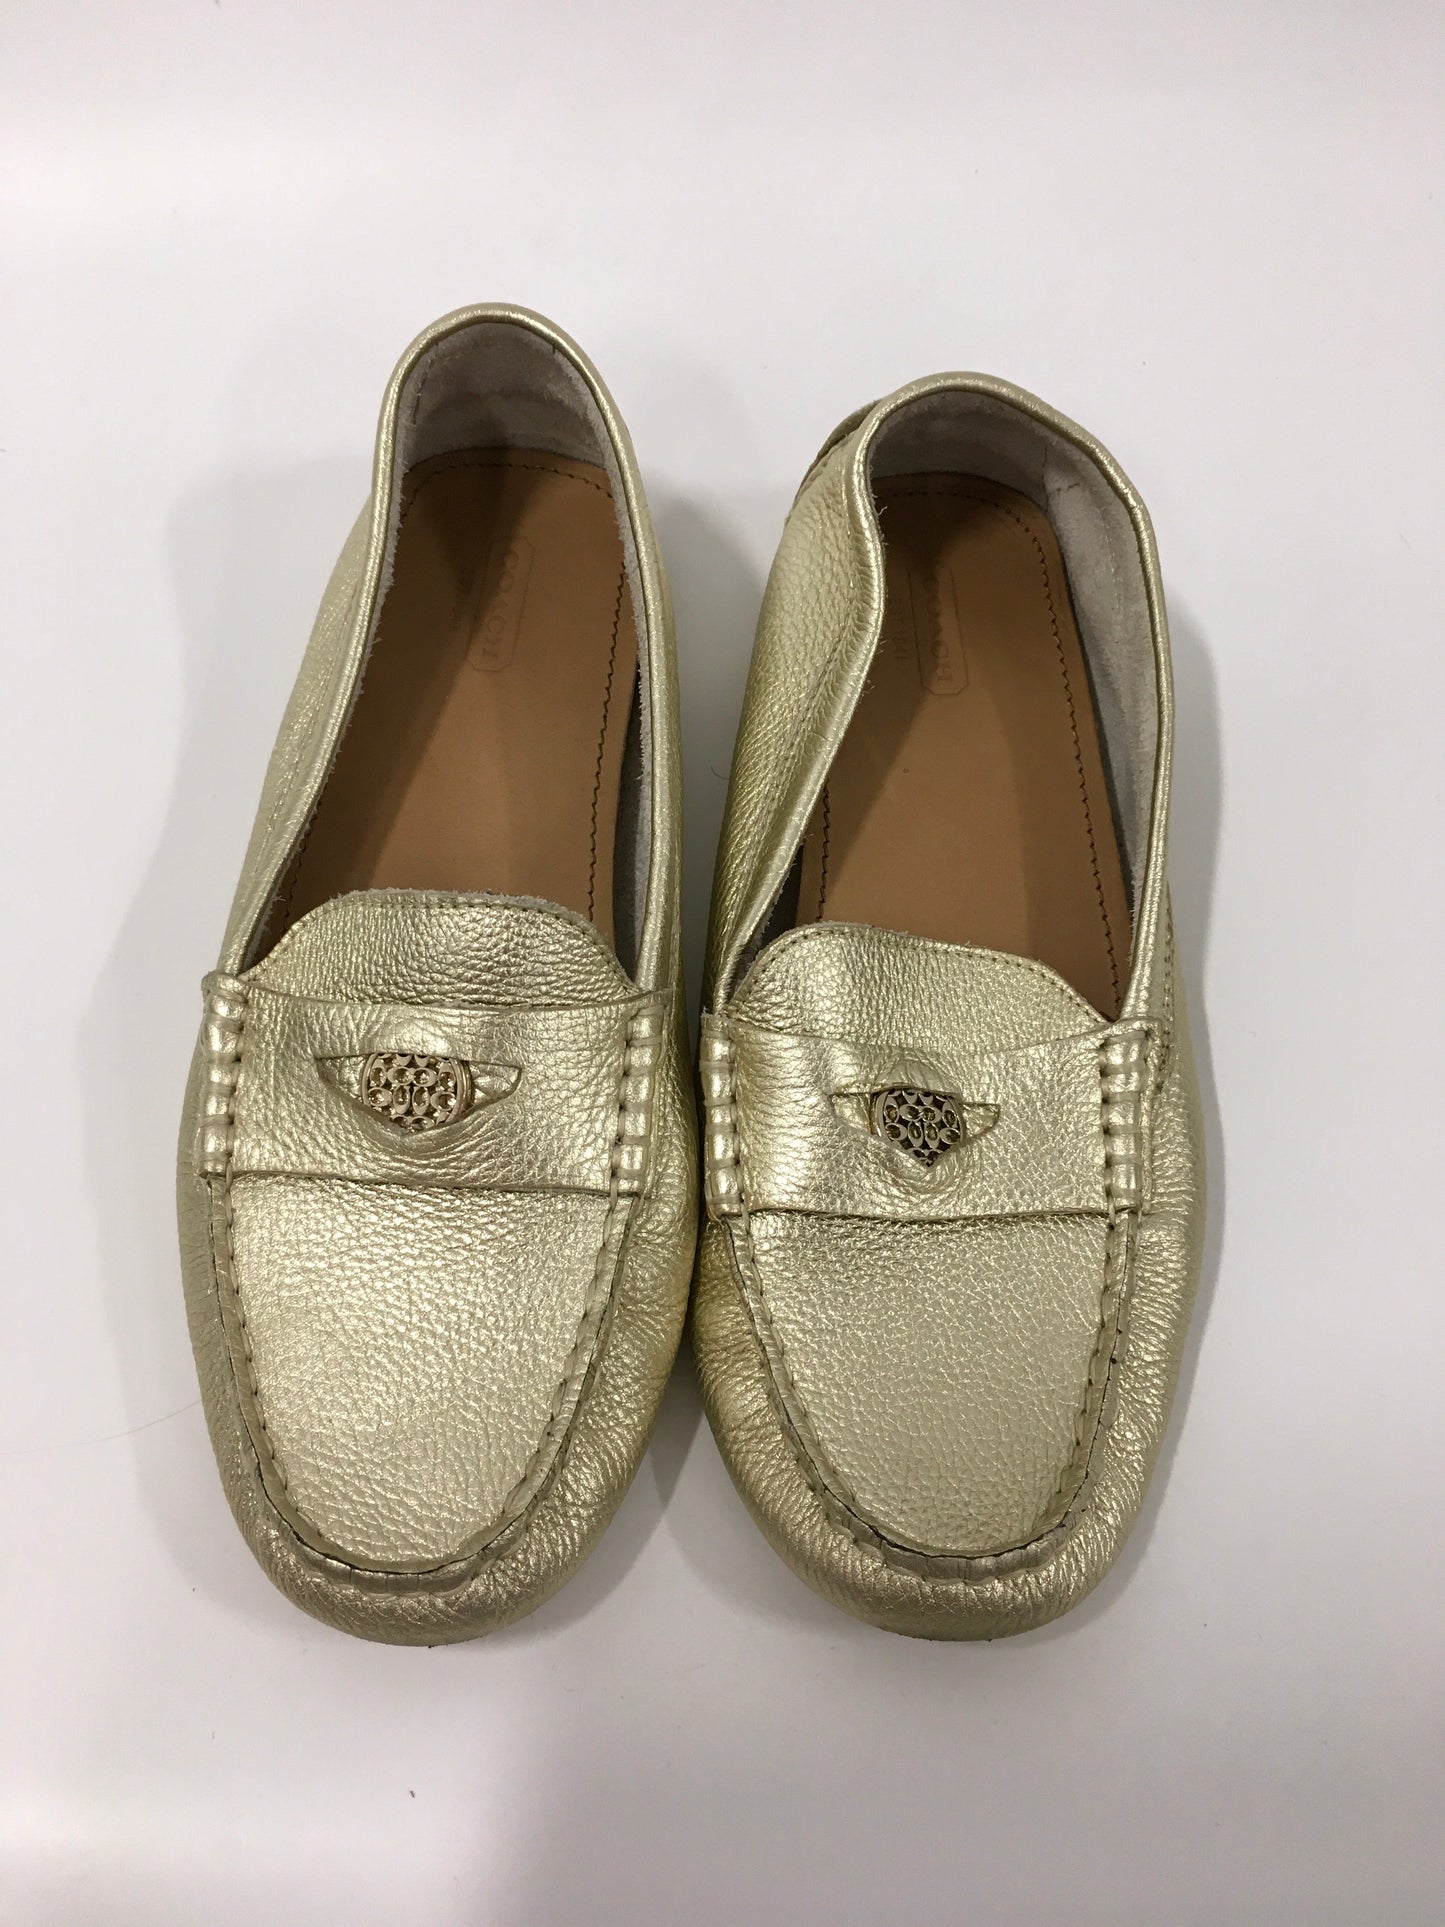 Gold Shoes Flats Loafer Oxford Coach, Size 8